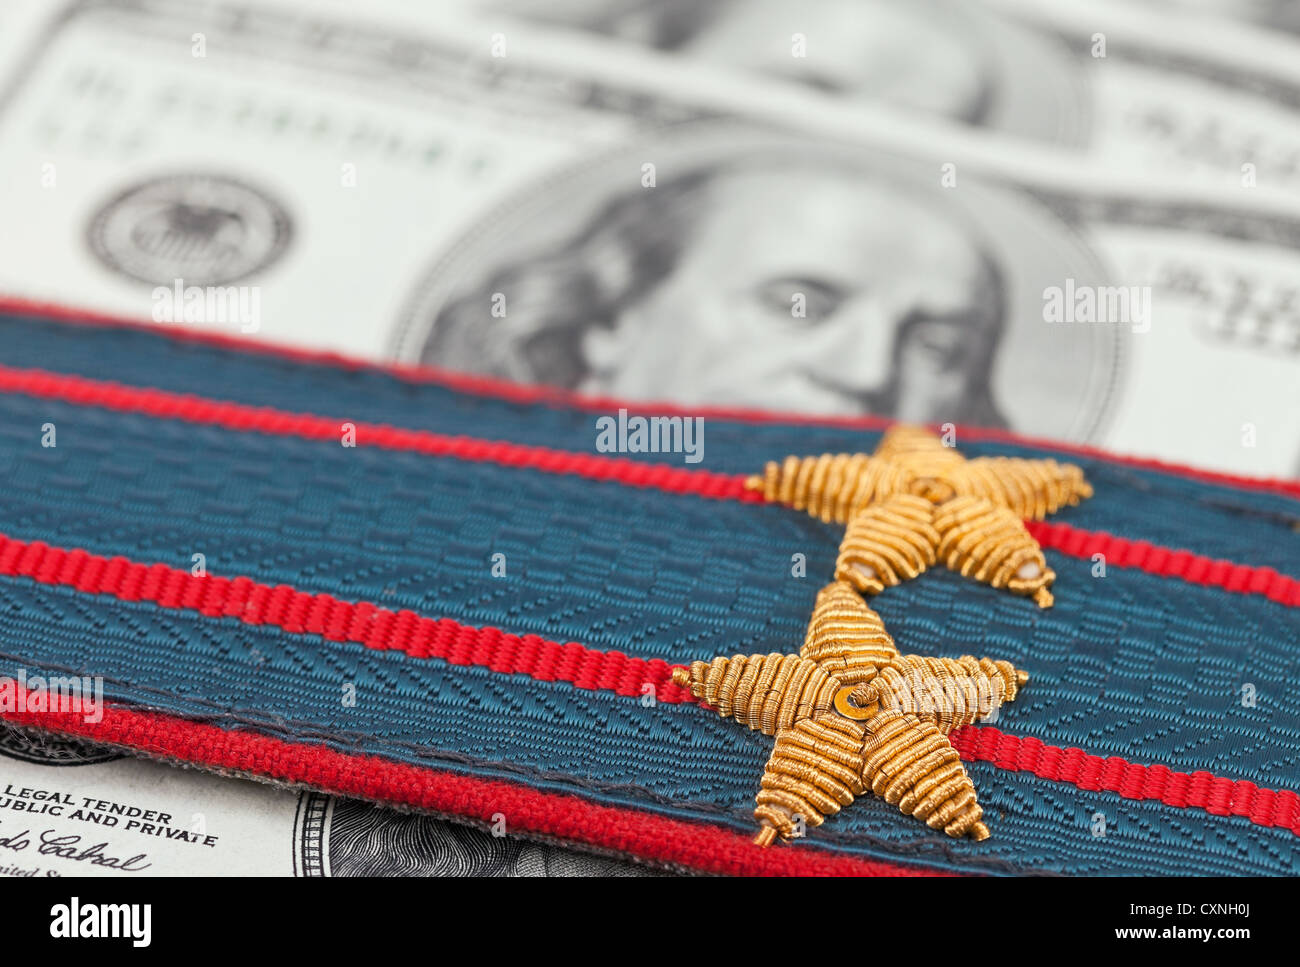 Shoulder strap of russian police on money background Stock Photo